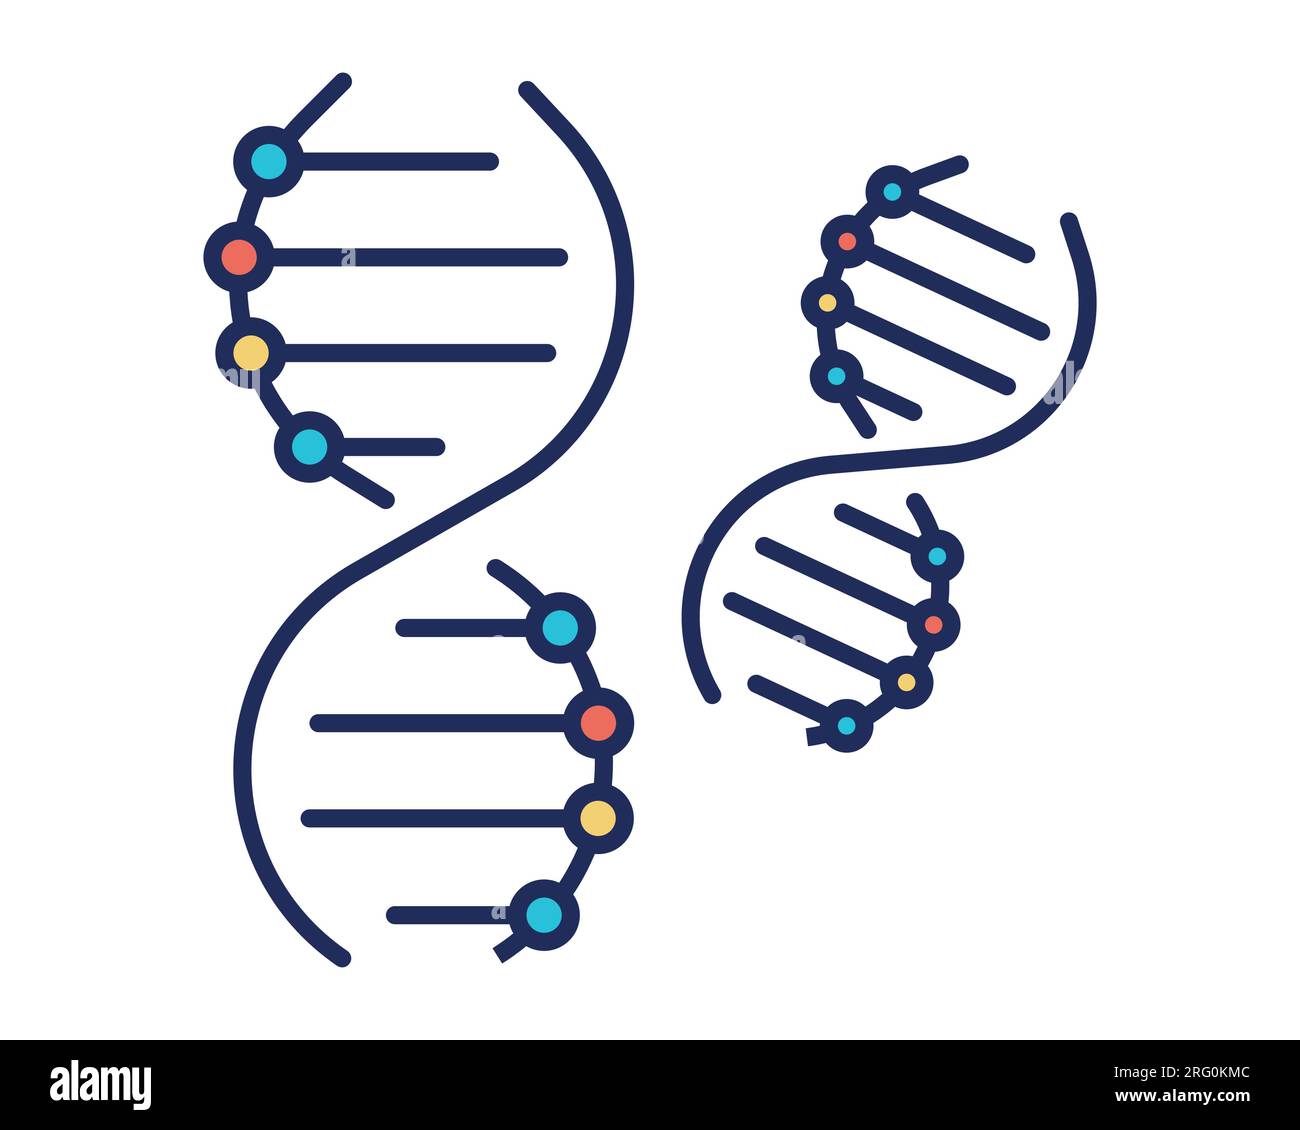 dna molecule icon over white background, flat style, vector illustration Stock Vector